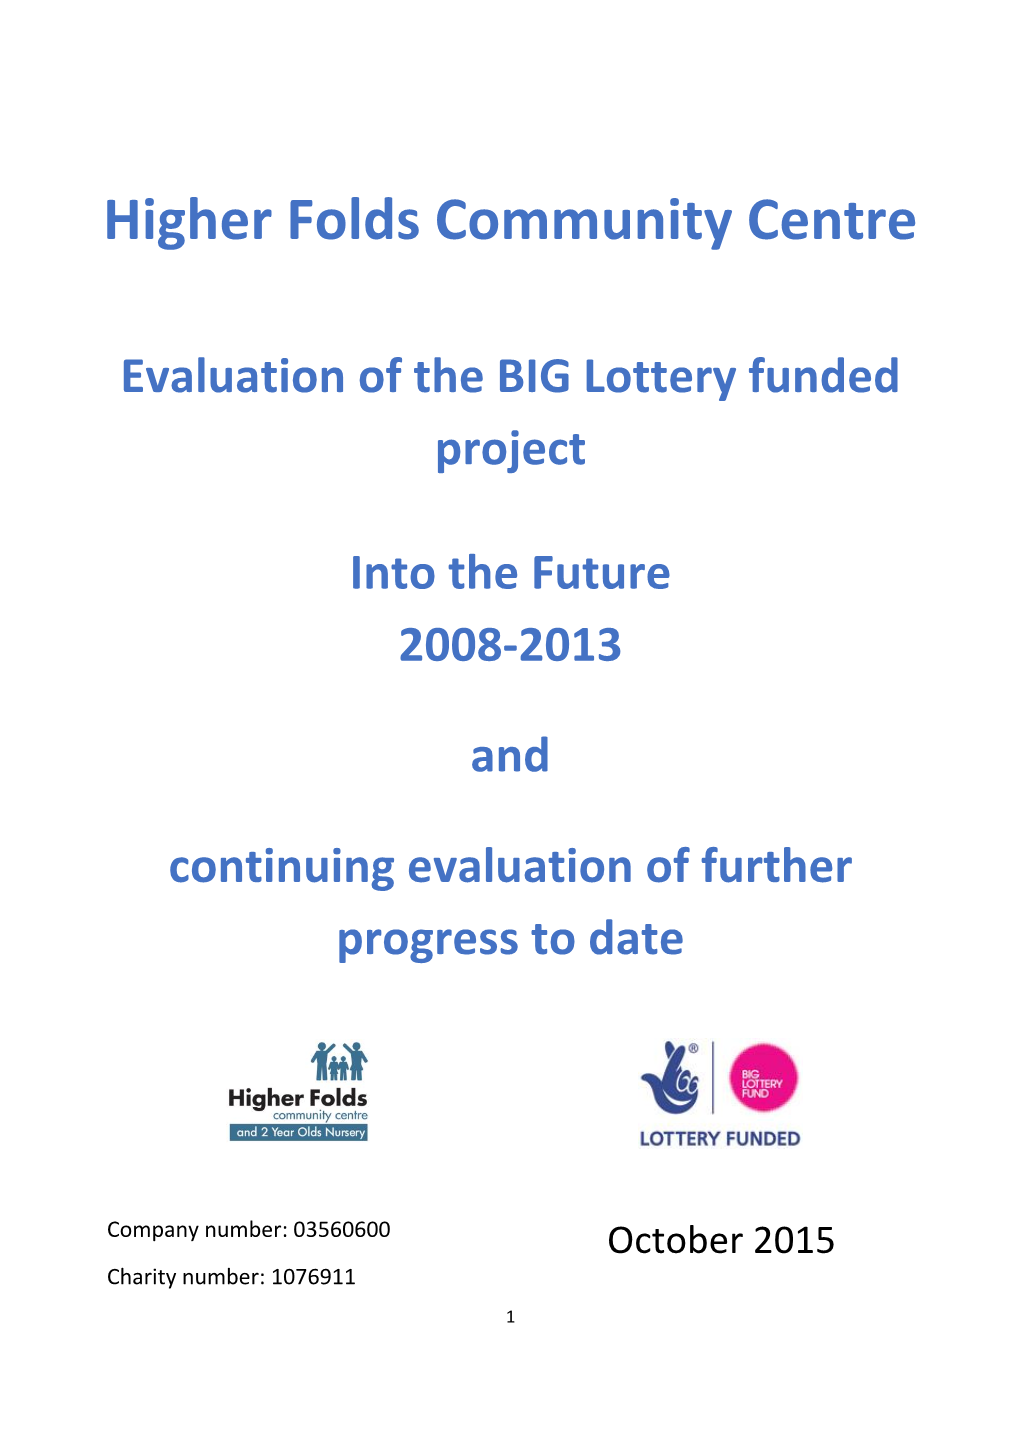 Higher Folds Community Centre Evaluation of the BIG Lottery Funded